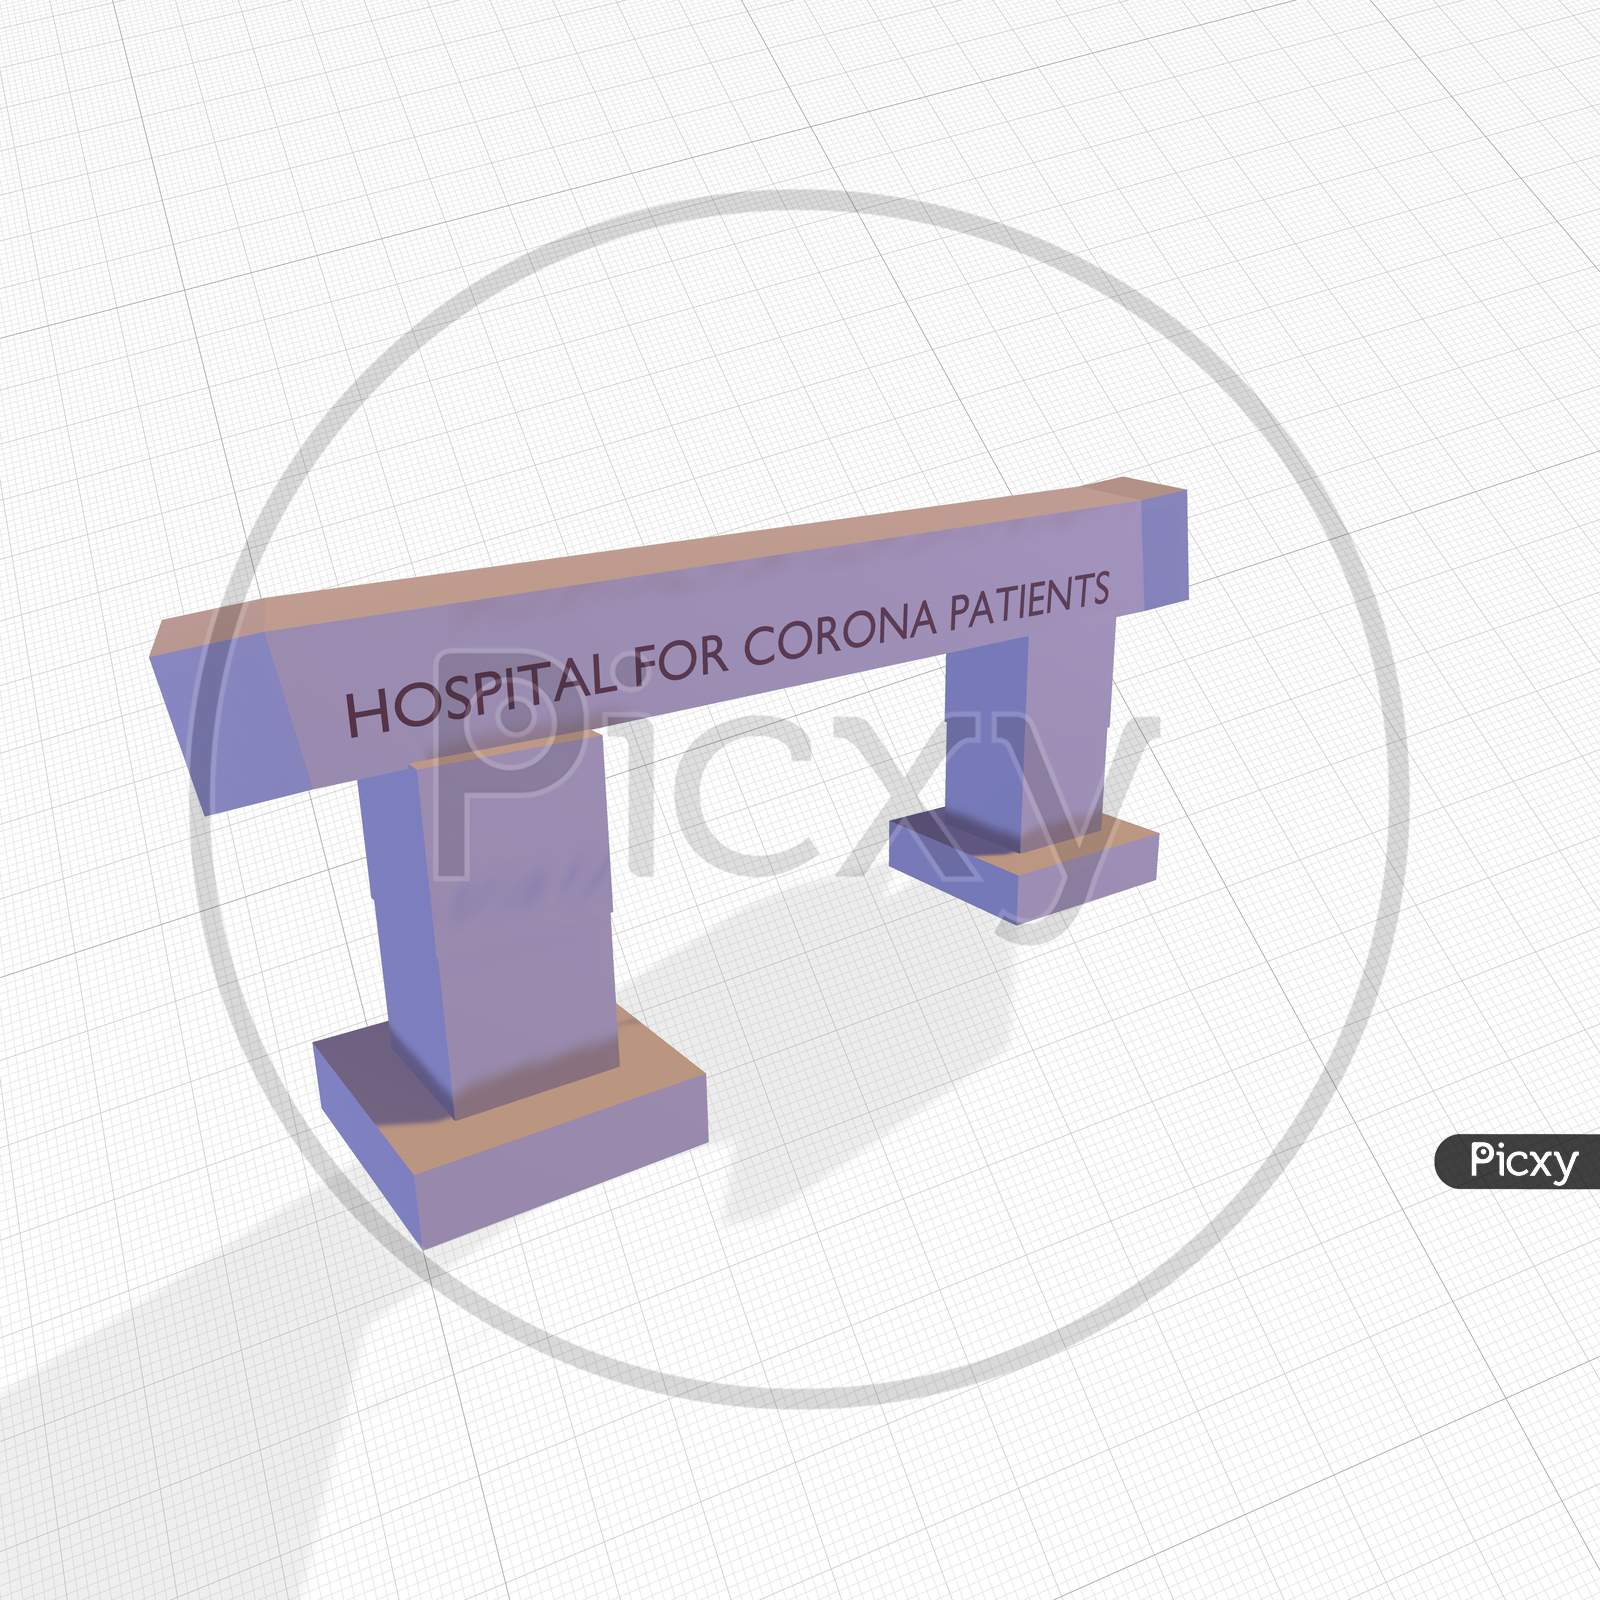 Three Dimensional Image Of A Hospital Entry Gate For Corona Patients